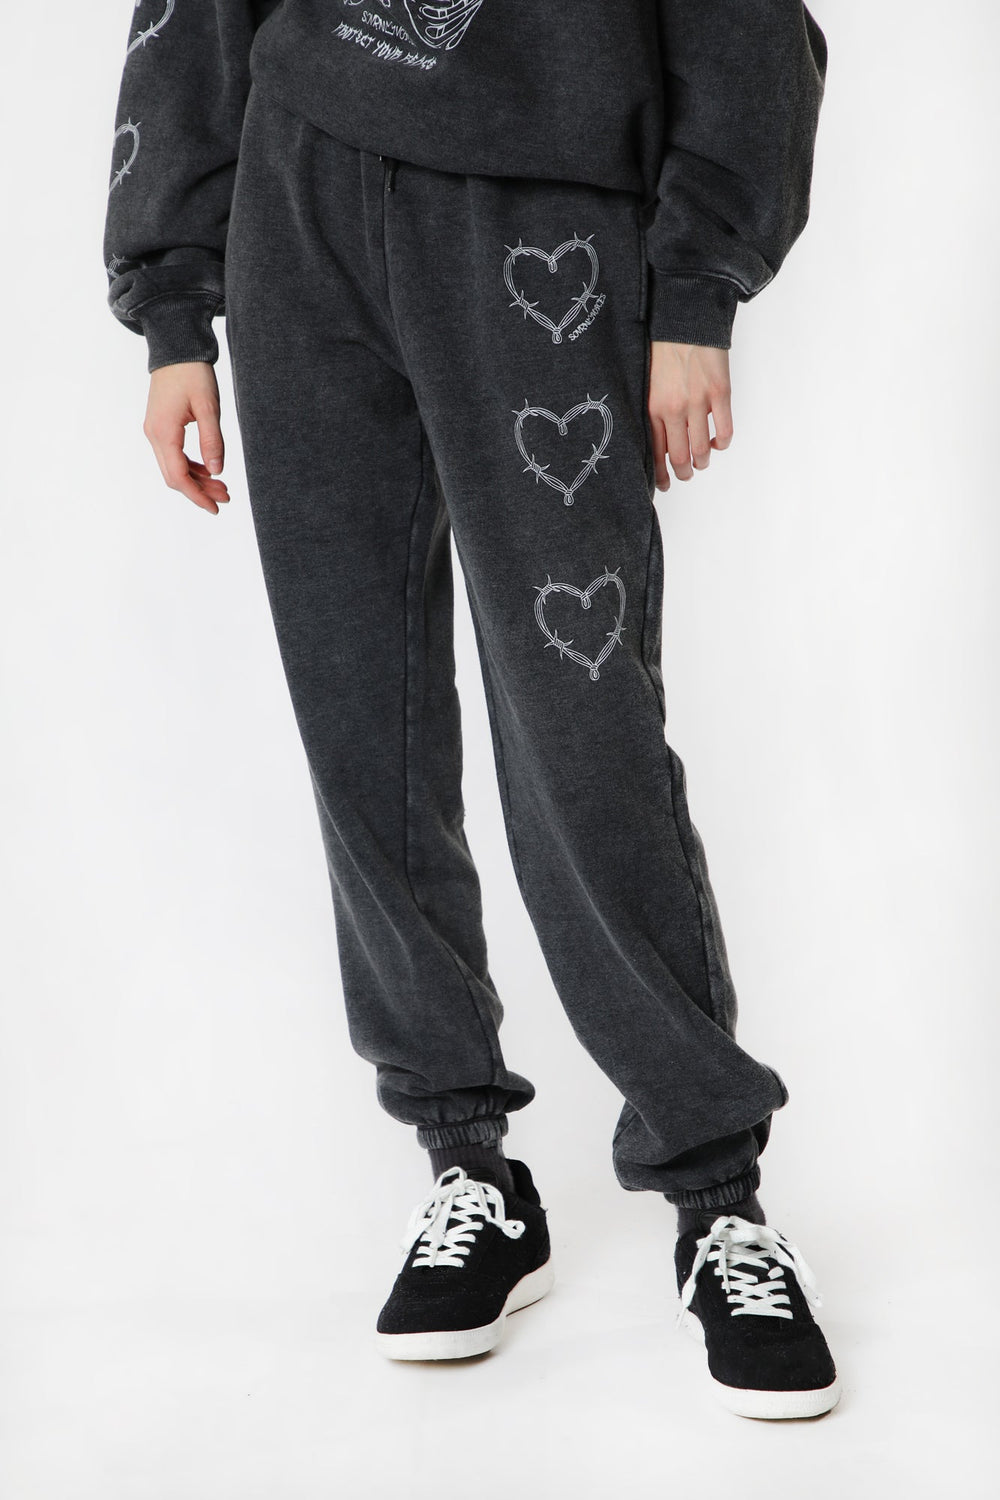 Womens Sovrn Voices Graphic Black Sweatpant Womens Sovrn Voices Graphic Black Sweatpant